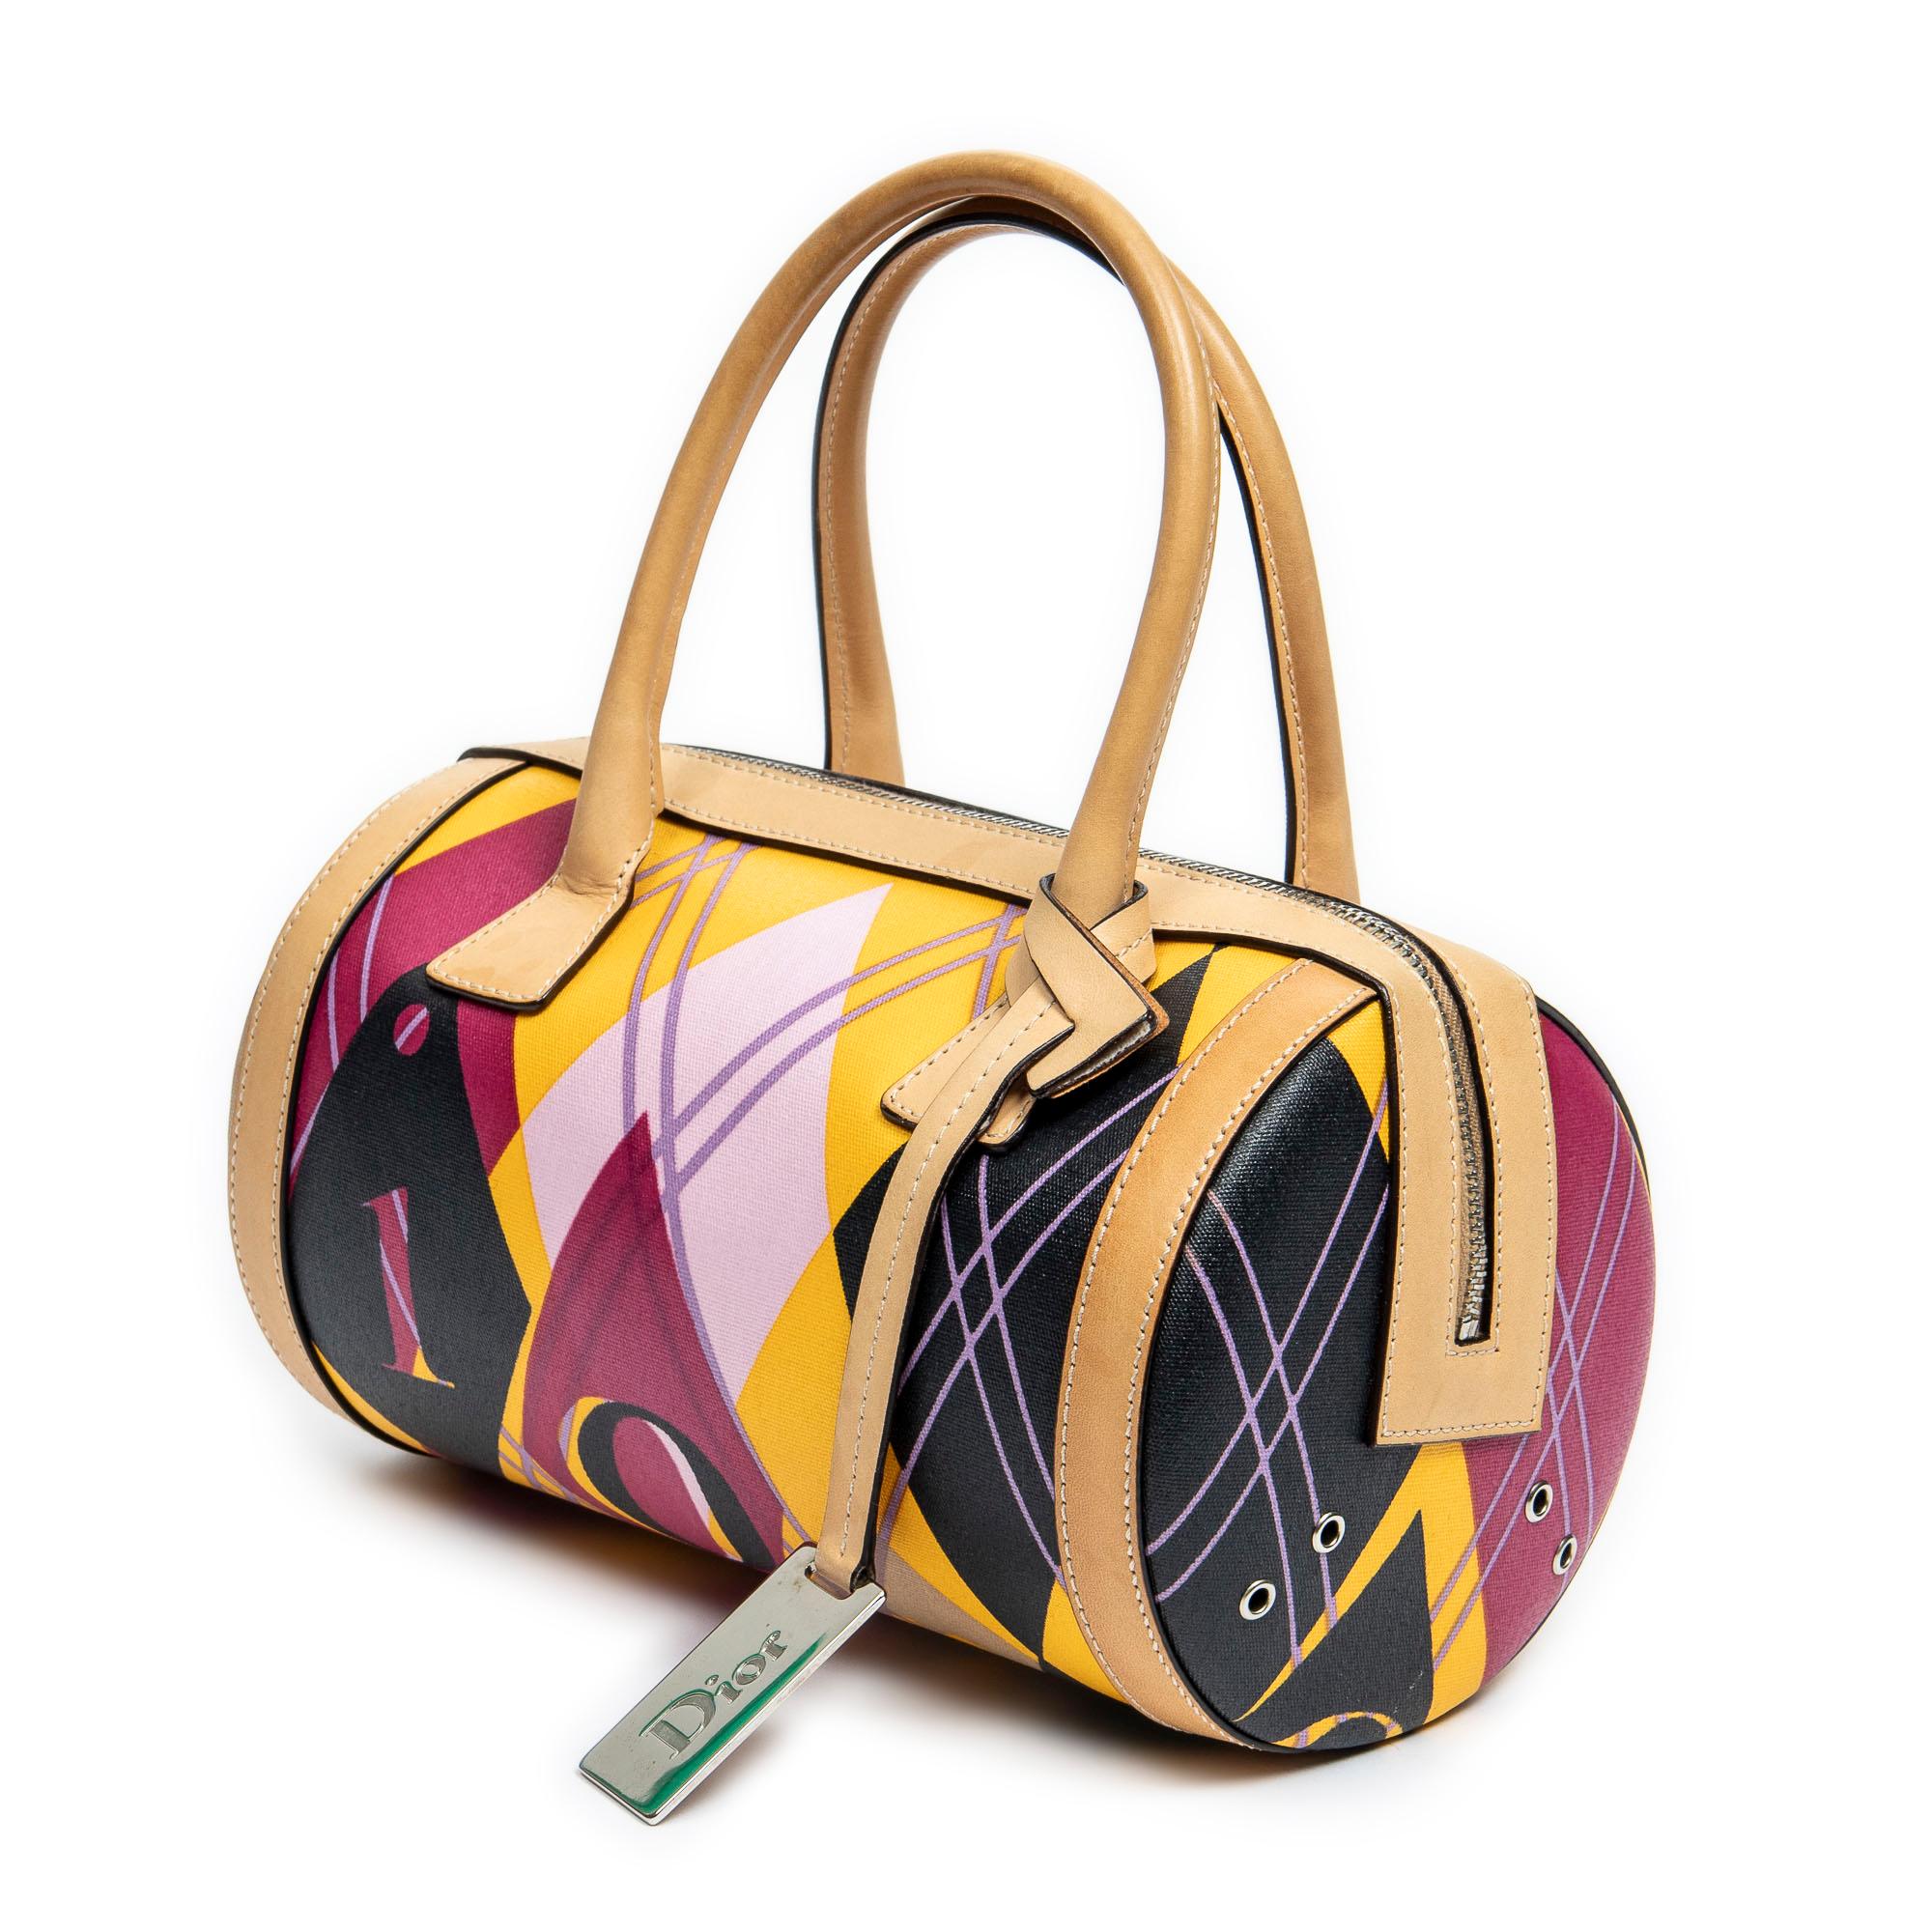 Introducing the Dior Beige/Pink/Black/Yellow Mini Golf Bowling Bag: a playful fusion of style and sophistication. Crafted from eye-catching argyle print coated canvas in a vibrant palette of beige, pink, black, and yellow, this bag exudes youthful